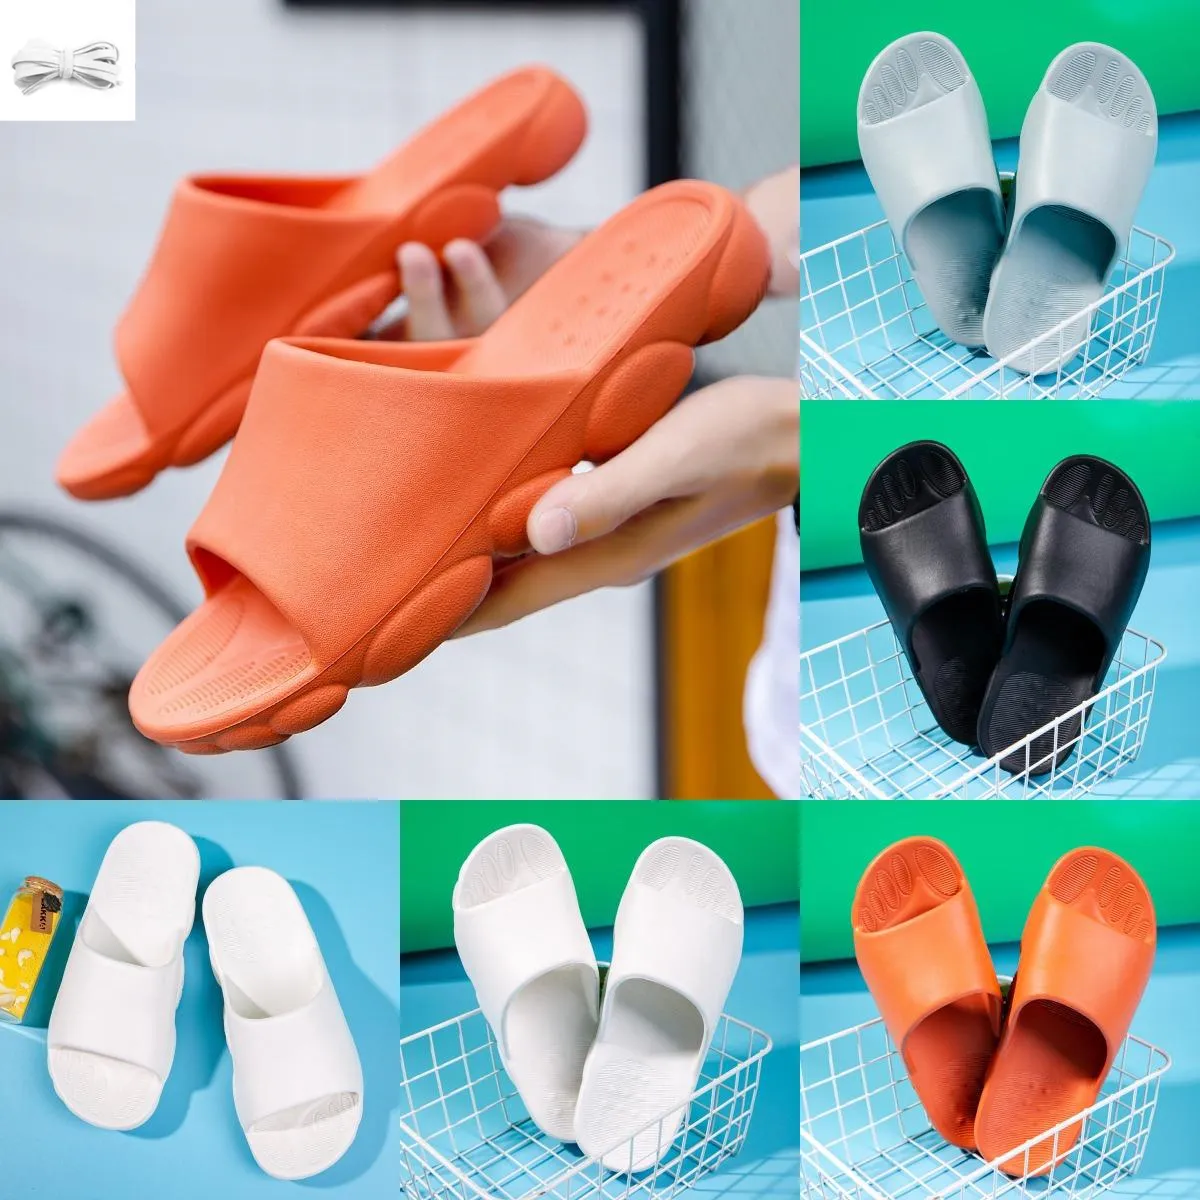 Slipper Designer Women Sandals Heels Cotton Fabric Straw Casual slippers for spring Flat Comfort Mules Padded Strap Shoe